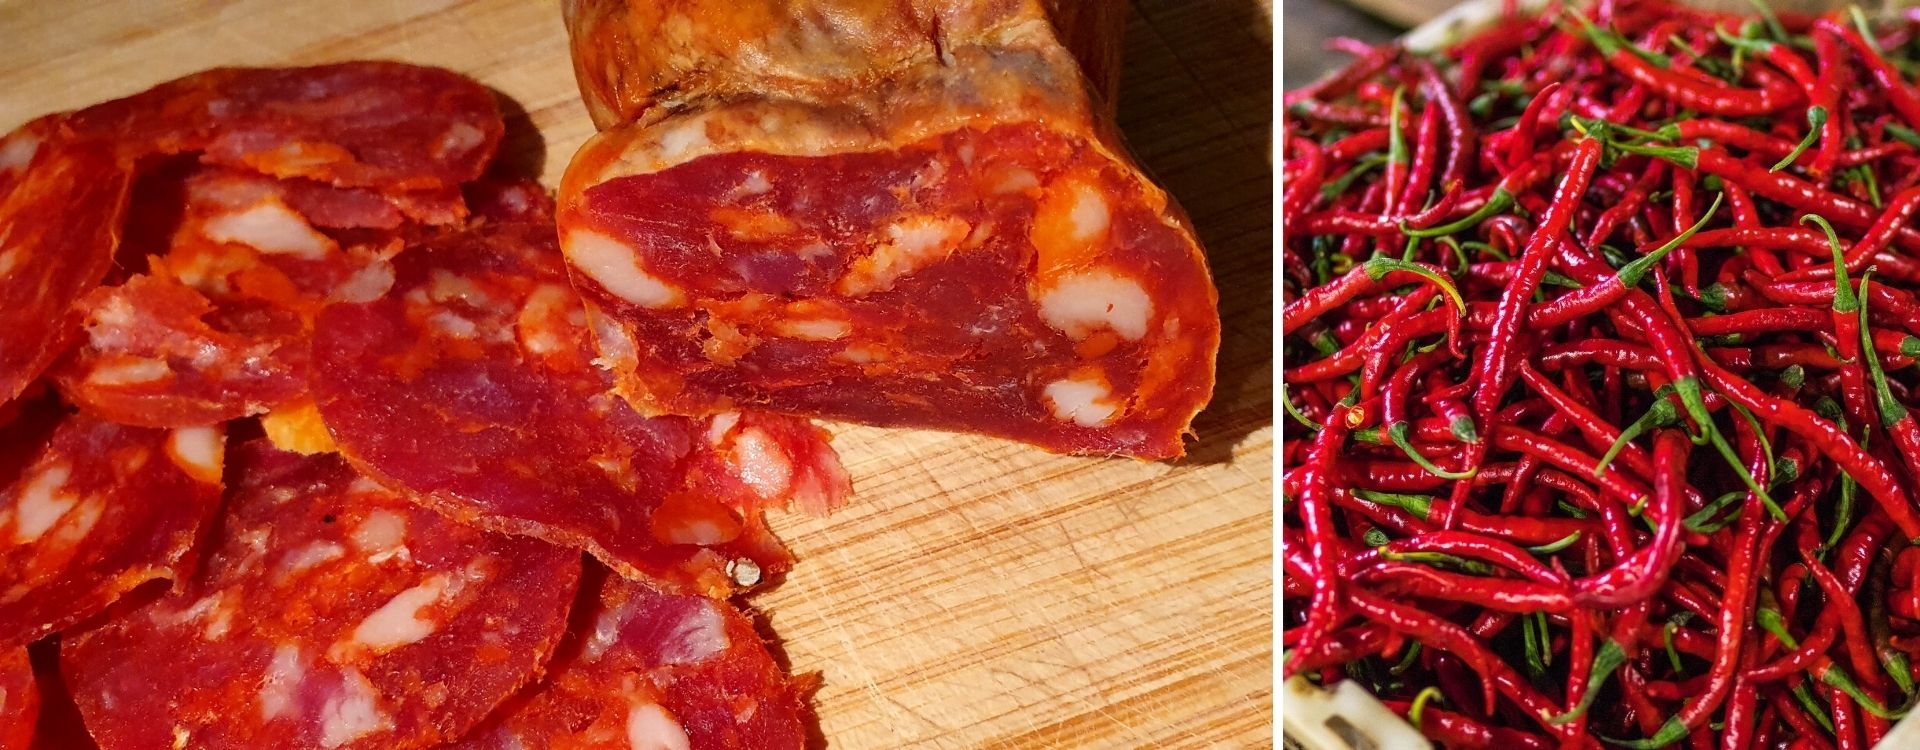 Spicy cold cuts: Ventricina salami and much more